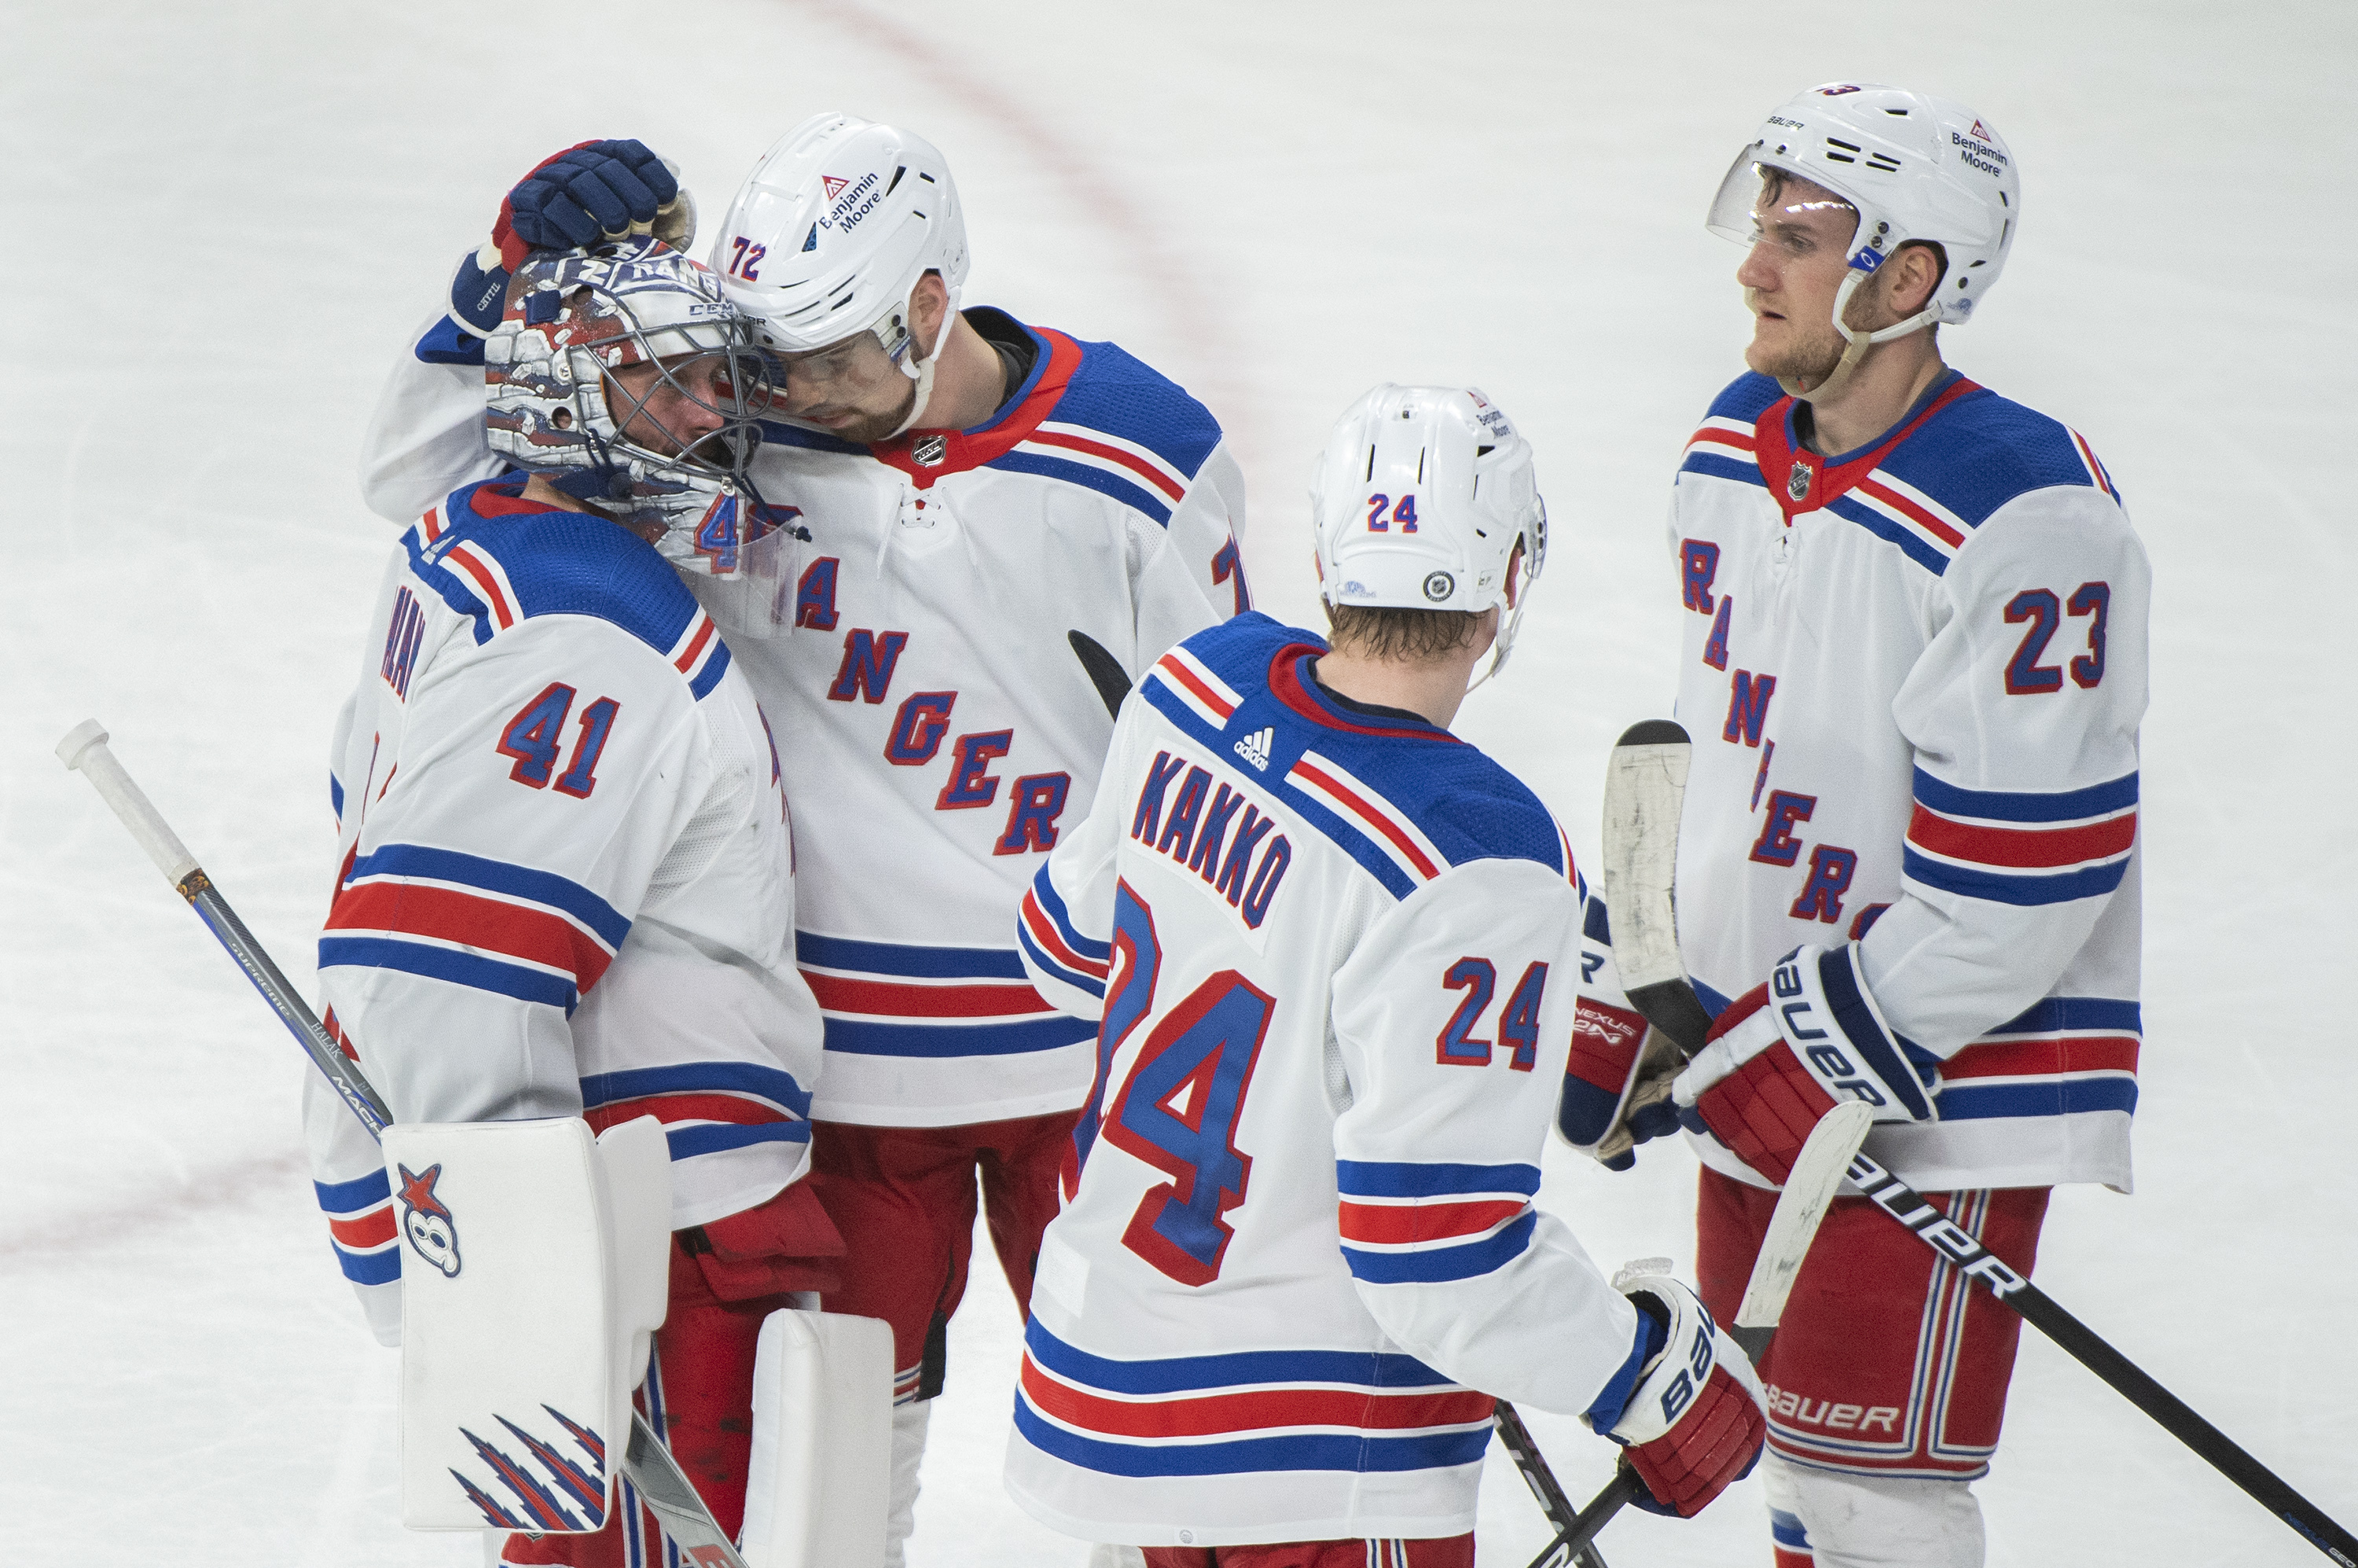 New Jersey Devils vs. New York Rangers: Live Stream, TV Channel, Start Time   NHL Playoffs First Round Game 5 - How to Watch and Stream Major League &  College Sports - Sports Illustrated.